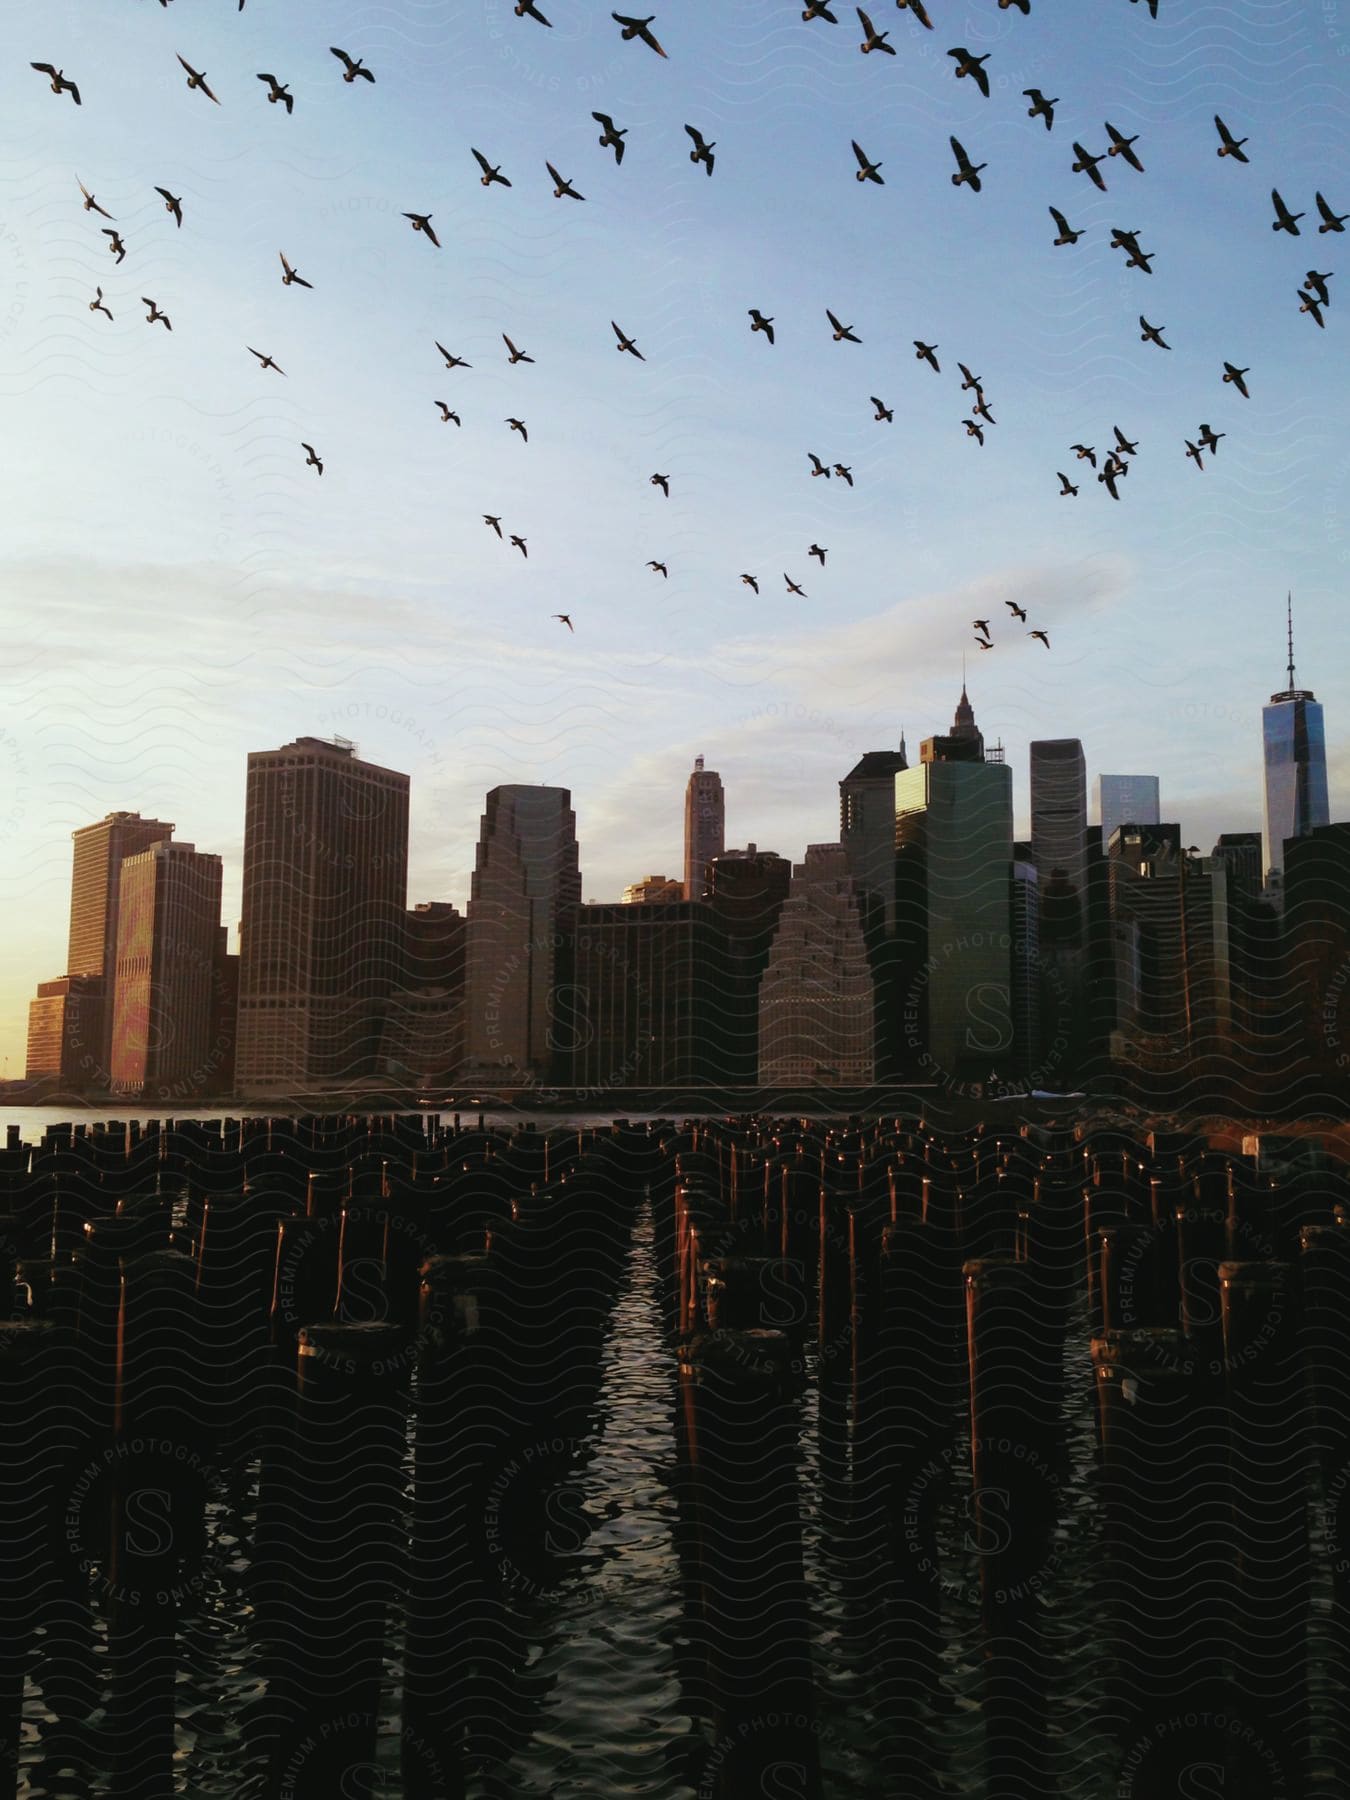 A city skyline with a body of water and birds flying in the sky